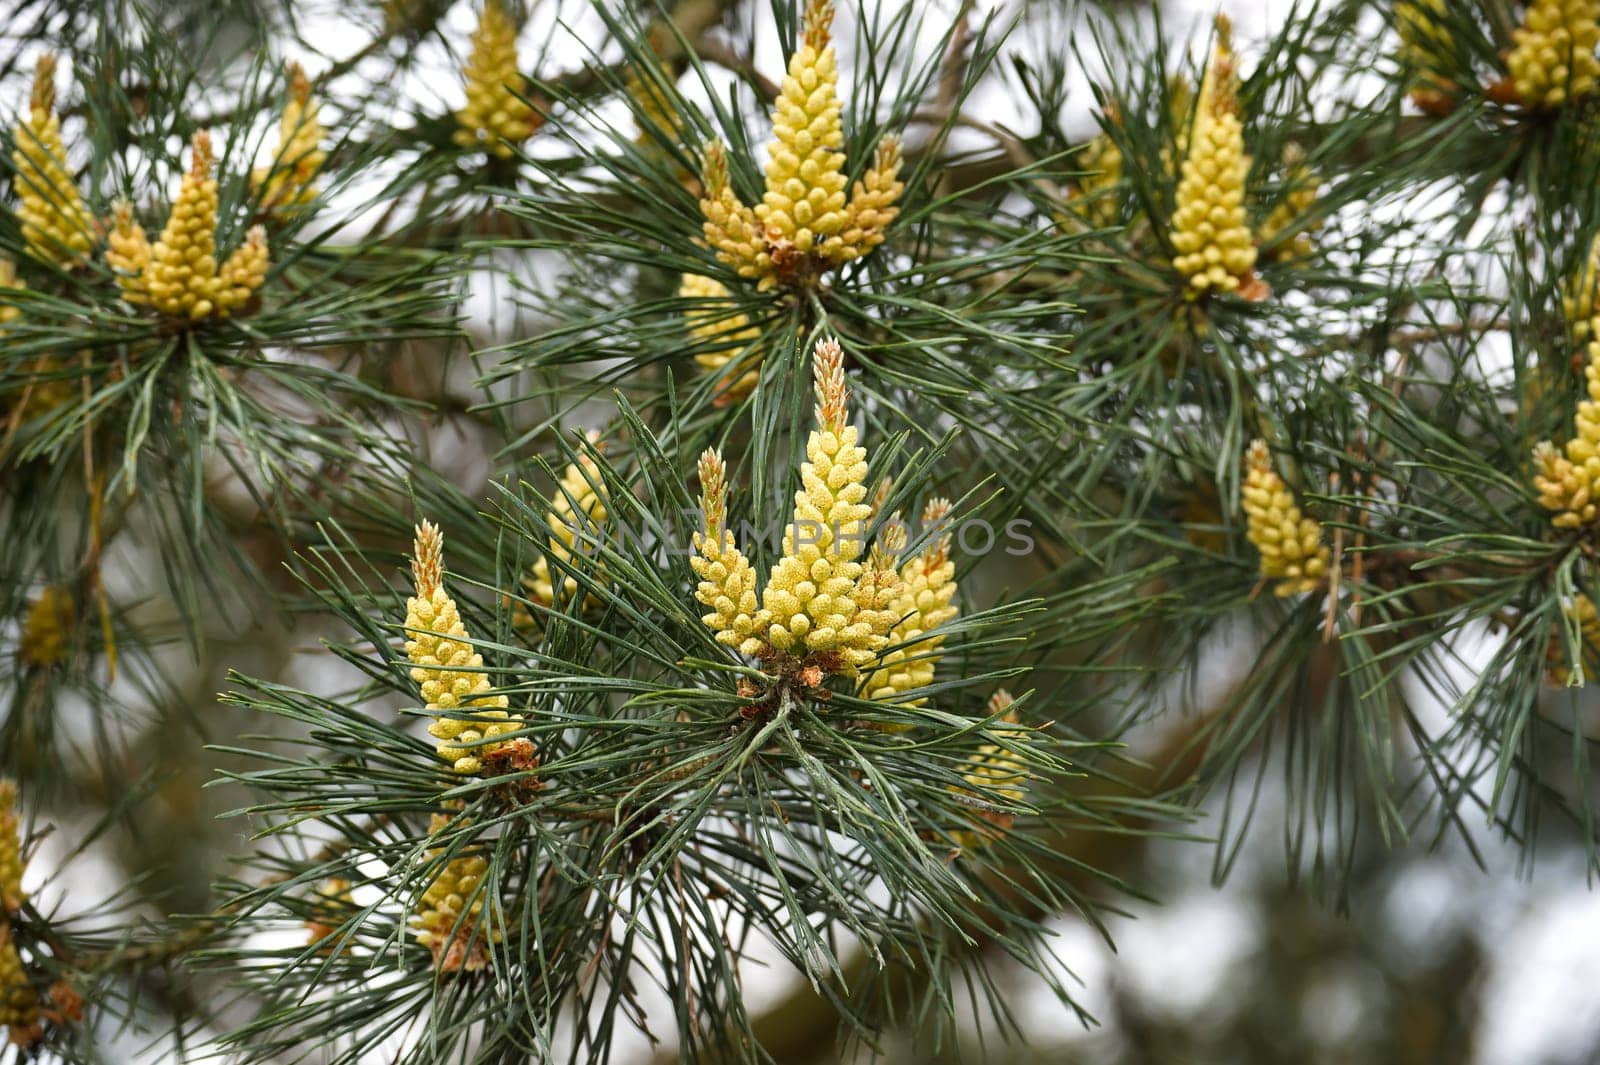 Natural essence of the pine tree during springtime bloom by NetPix